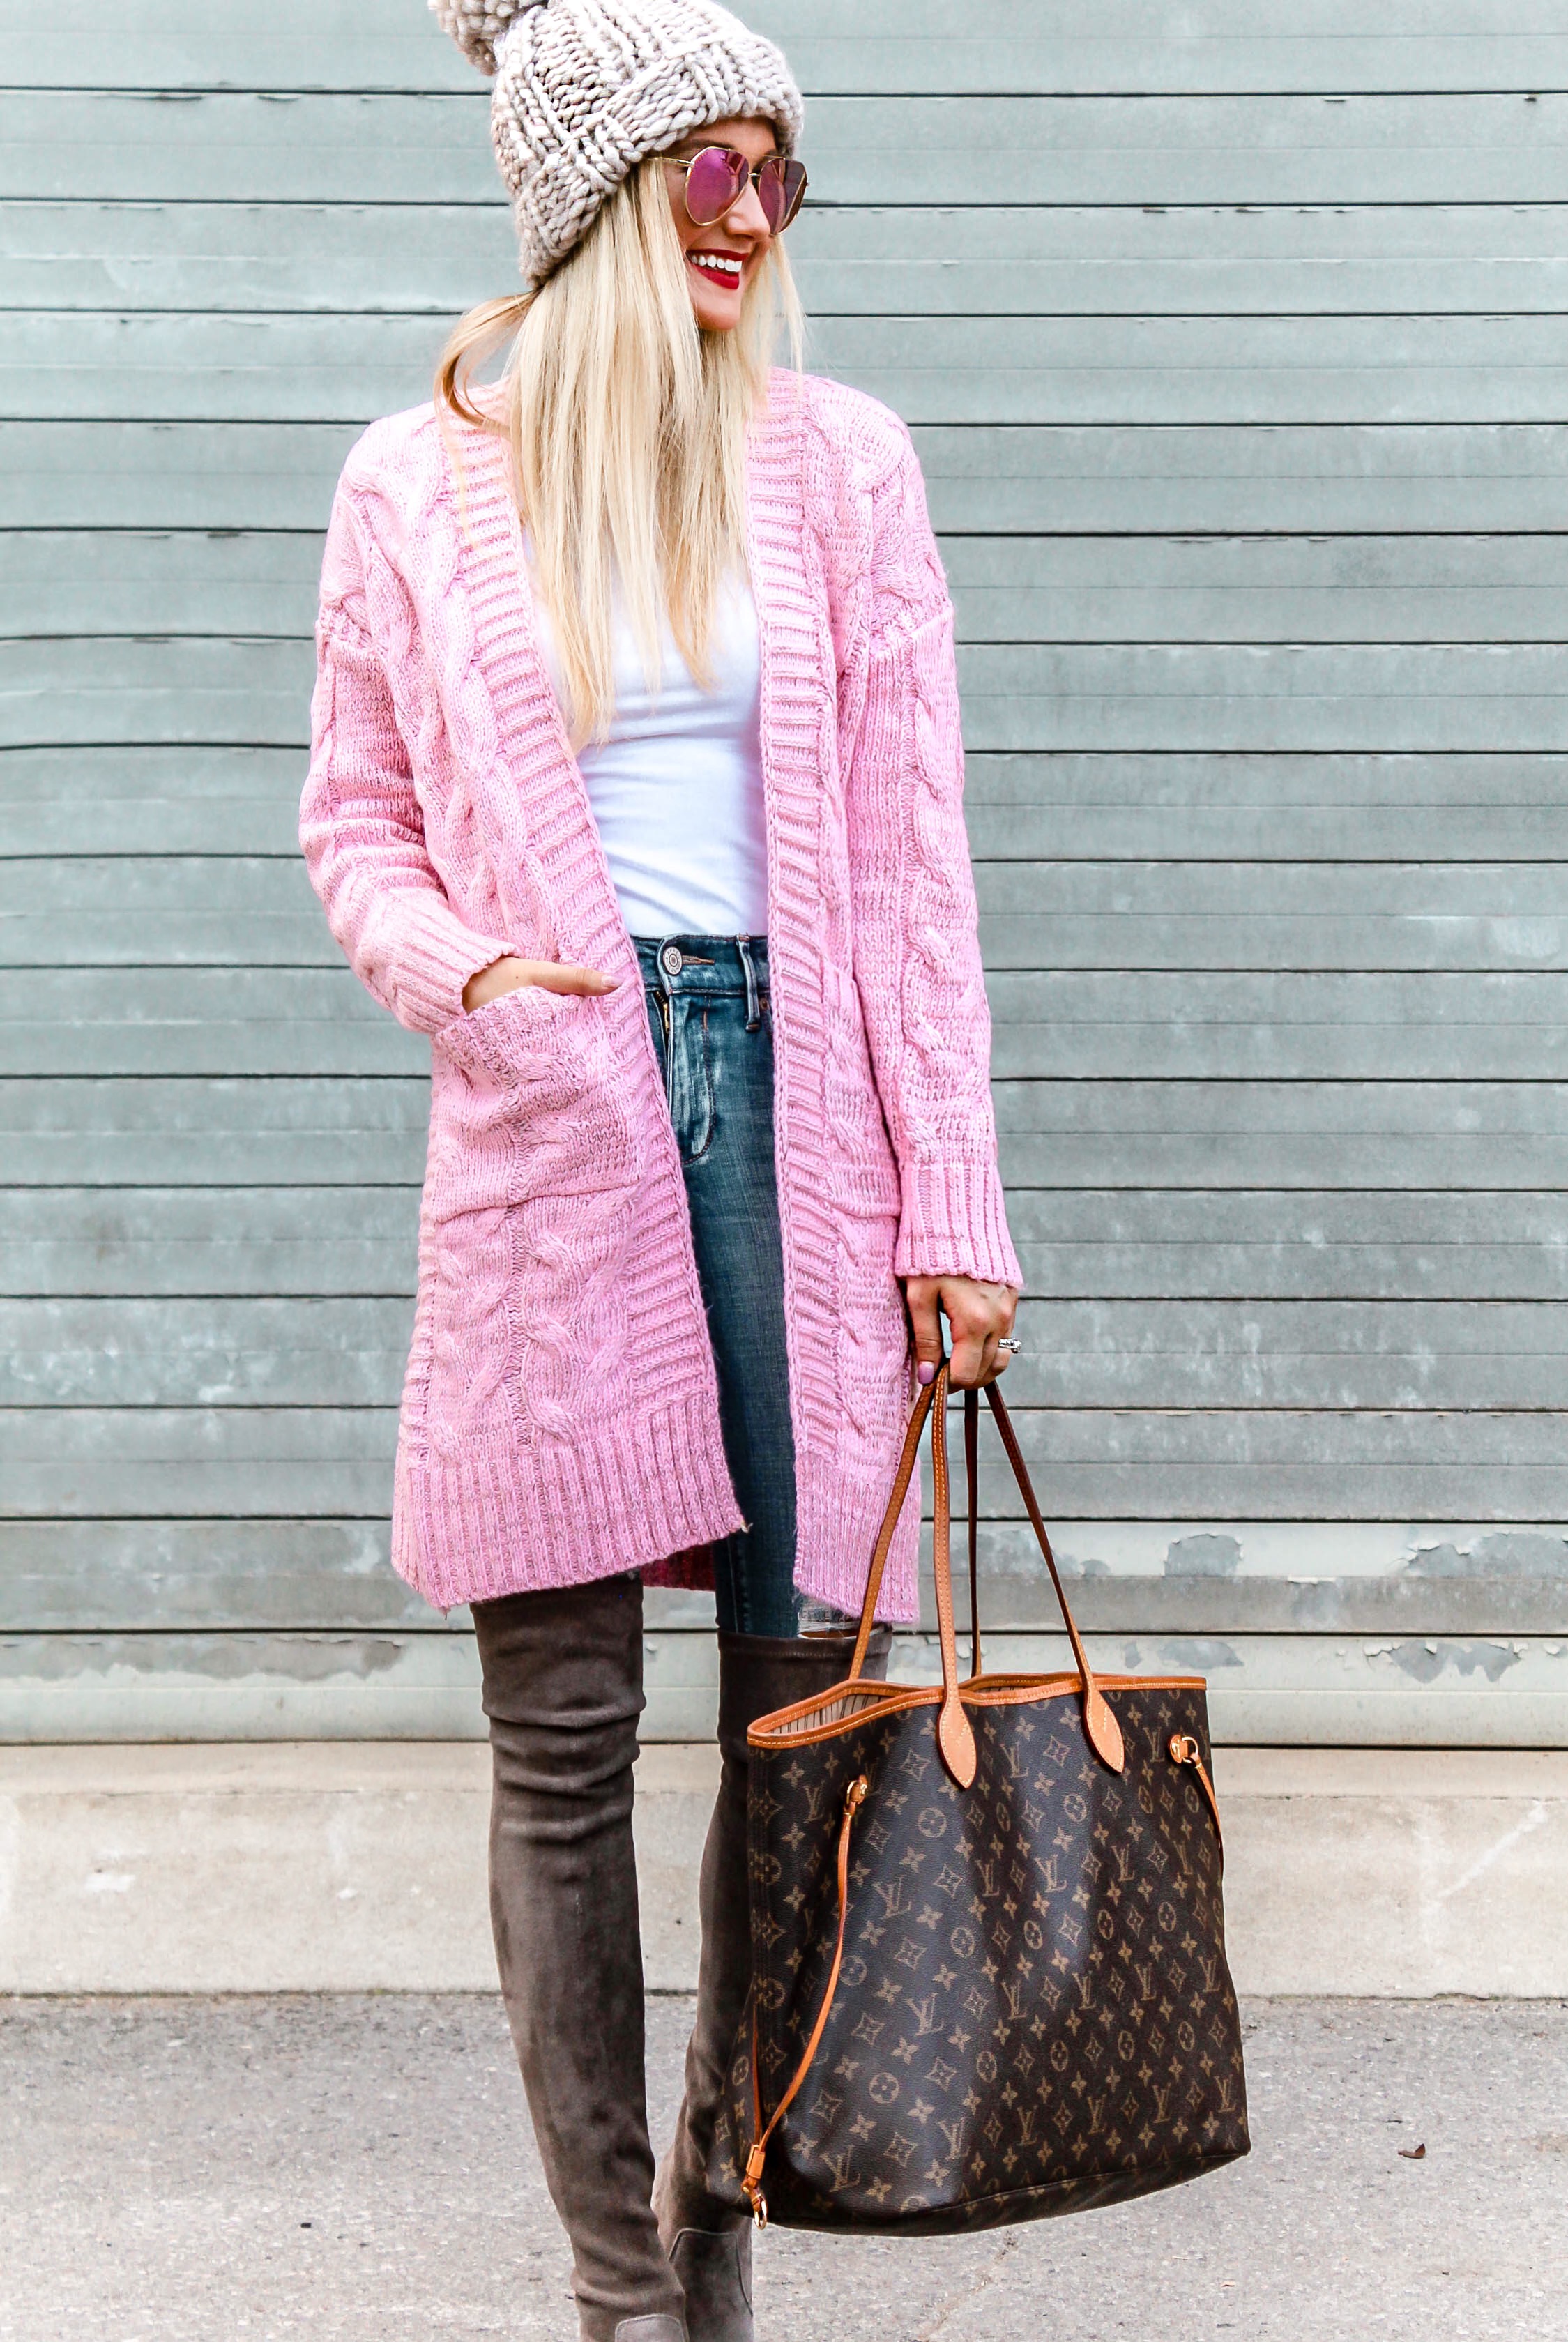 The Perfect Light Pink Cardi + My Trick to Whiter Teeth | love 'n' labels www.lovenlabels.com